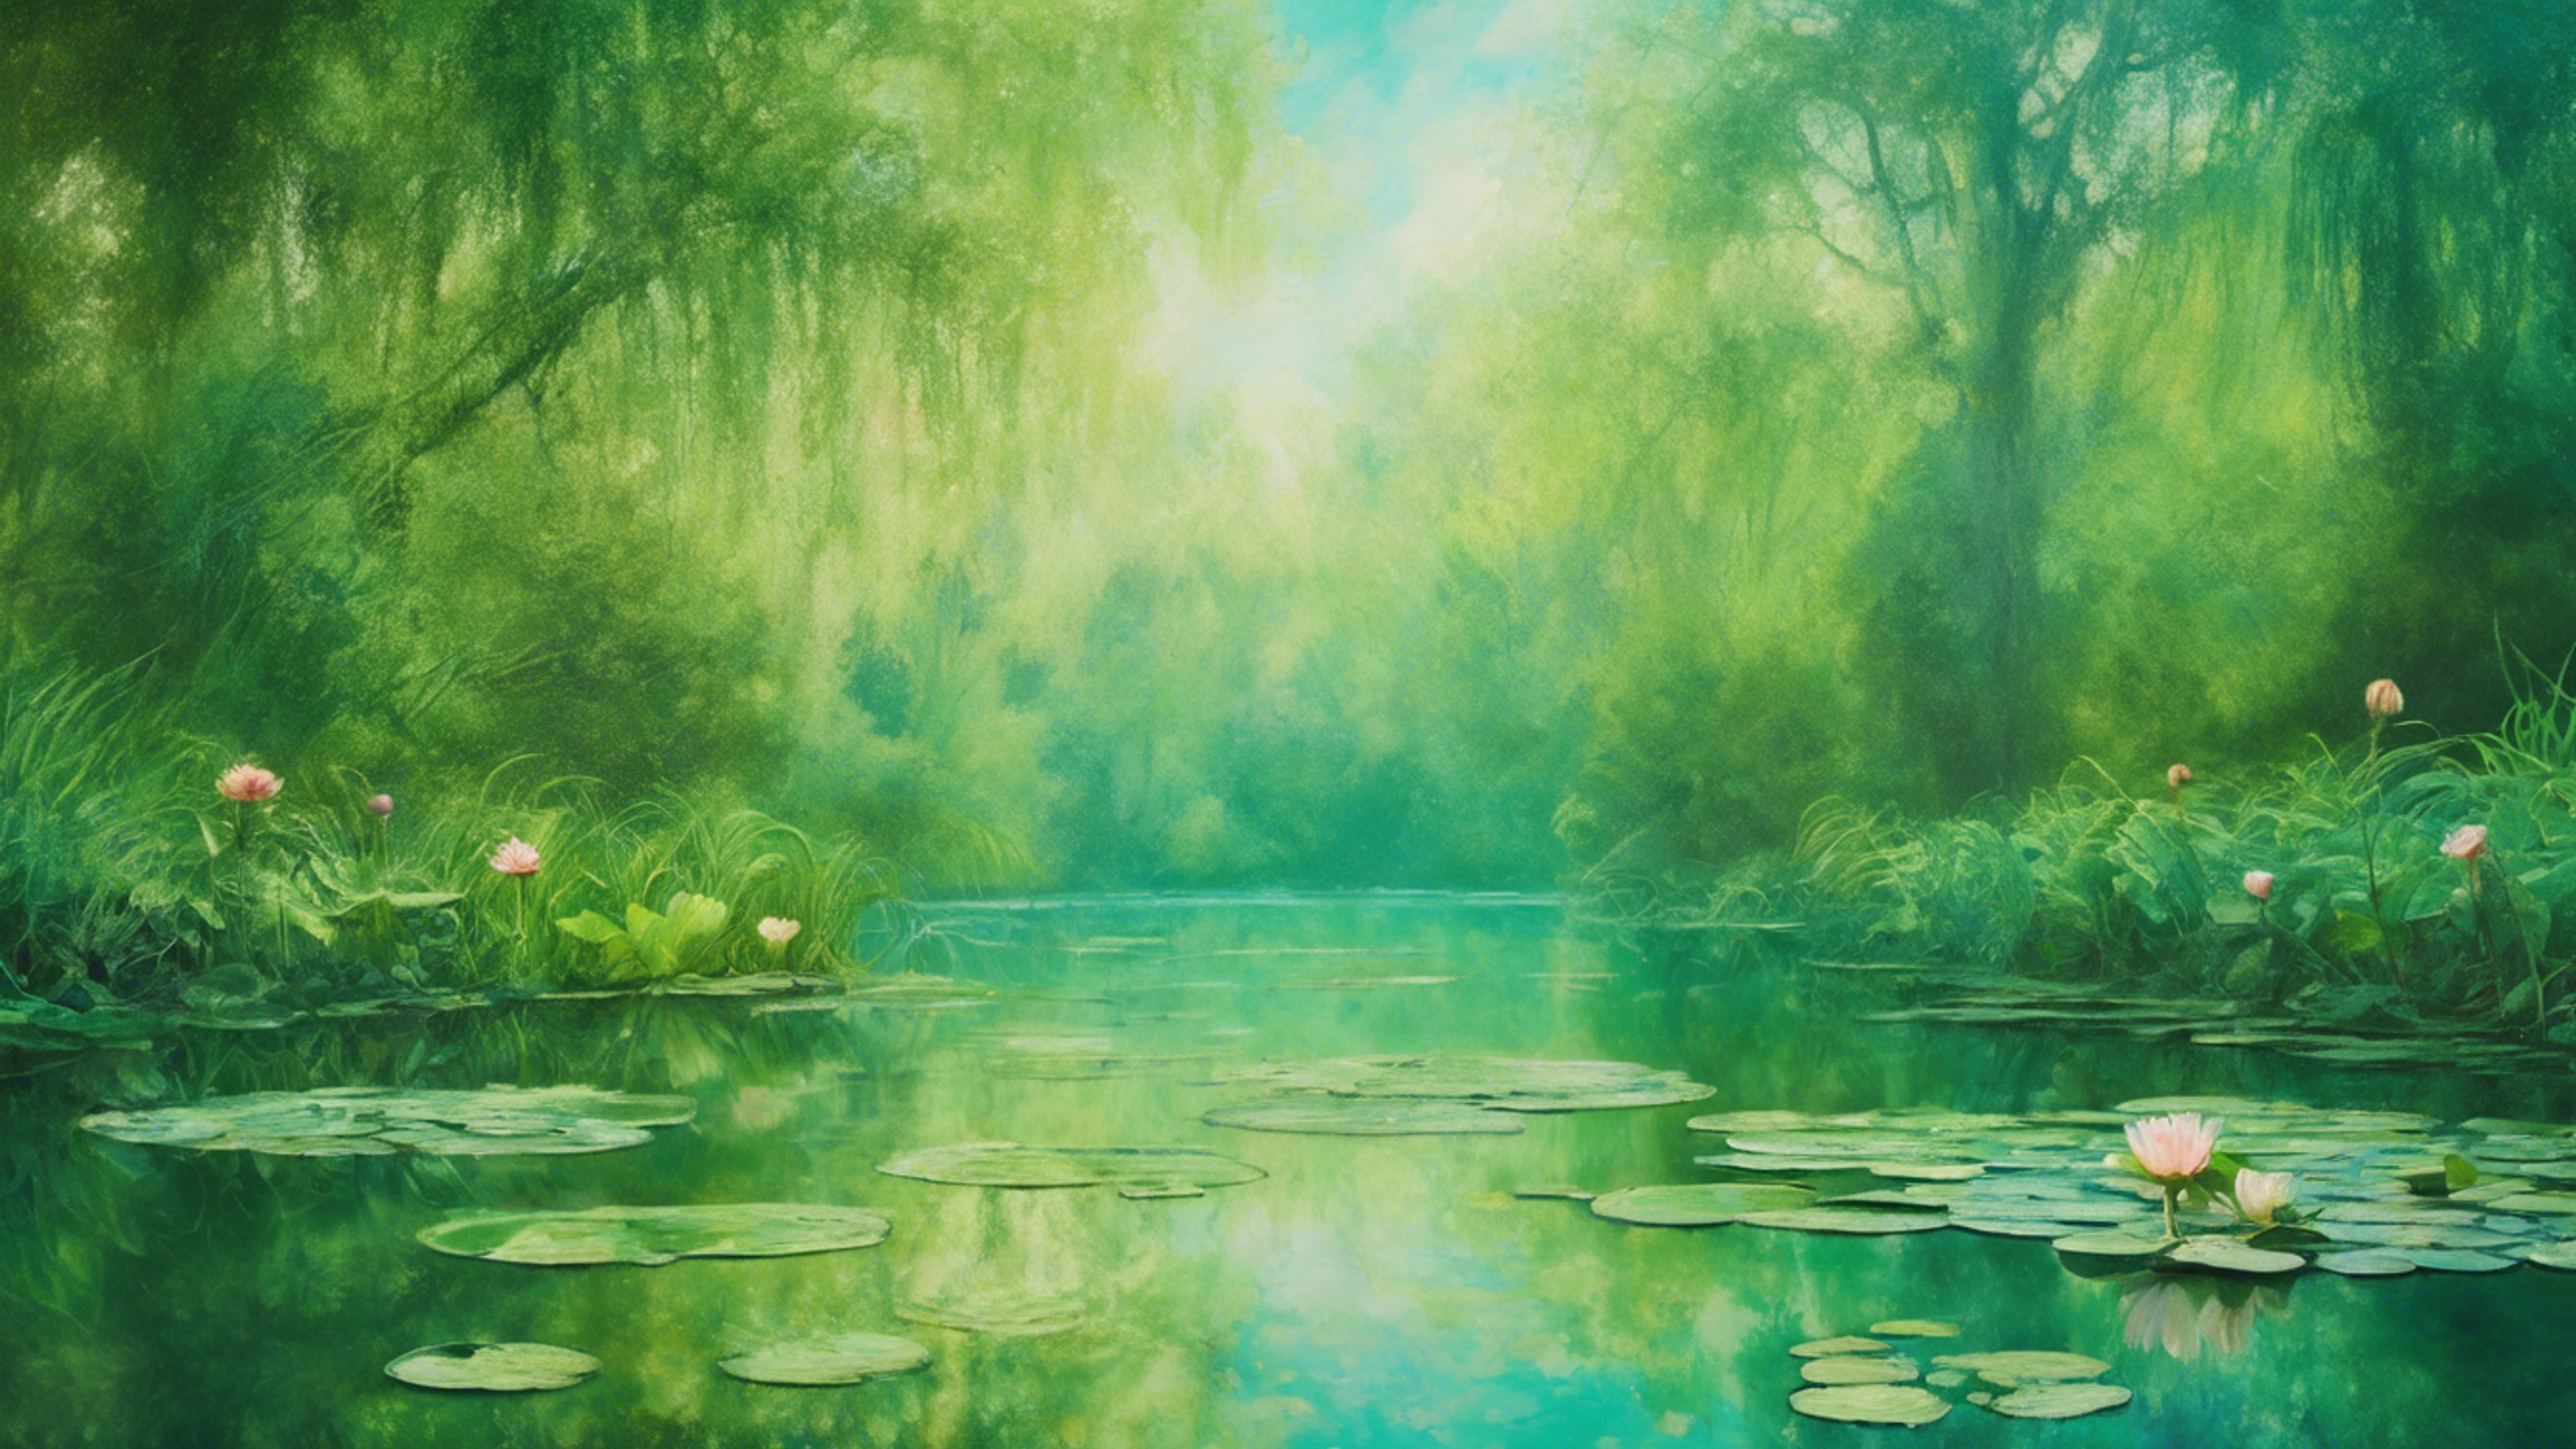 A landscape painting inspired by Monet's Water Lilies, with cool green hues. วอลล์เปเปอร์[9f0abb477fe746e08ba1]